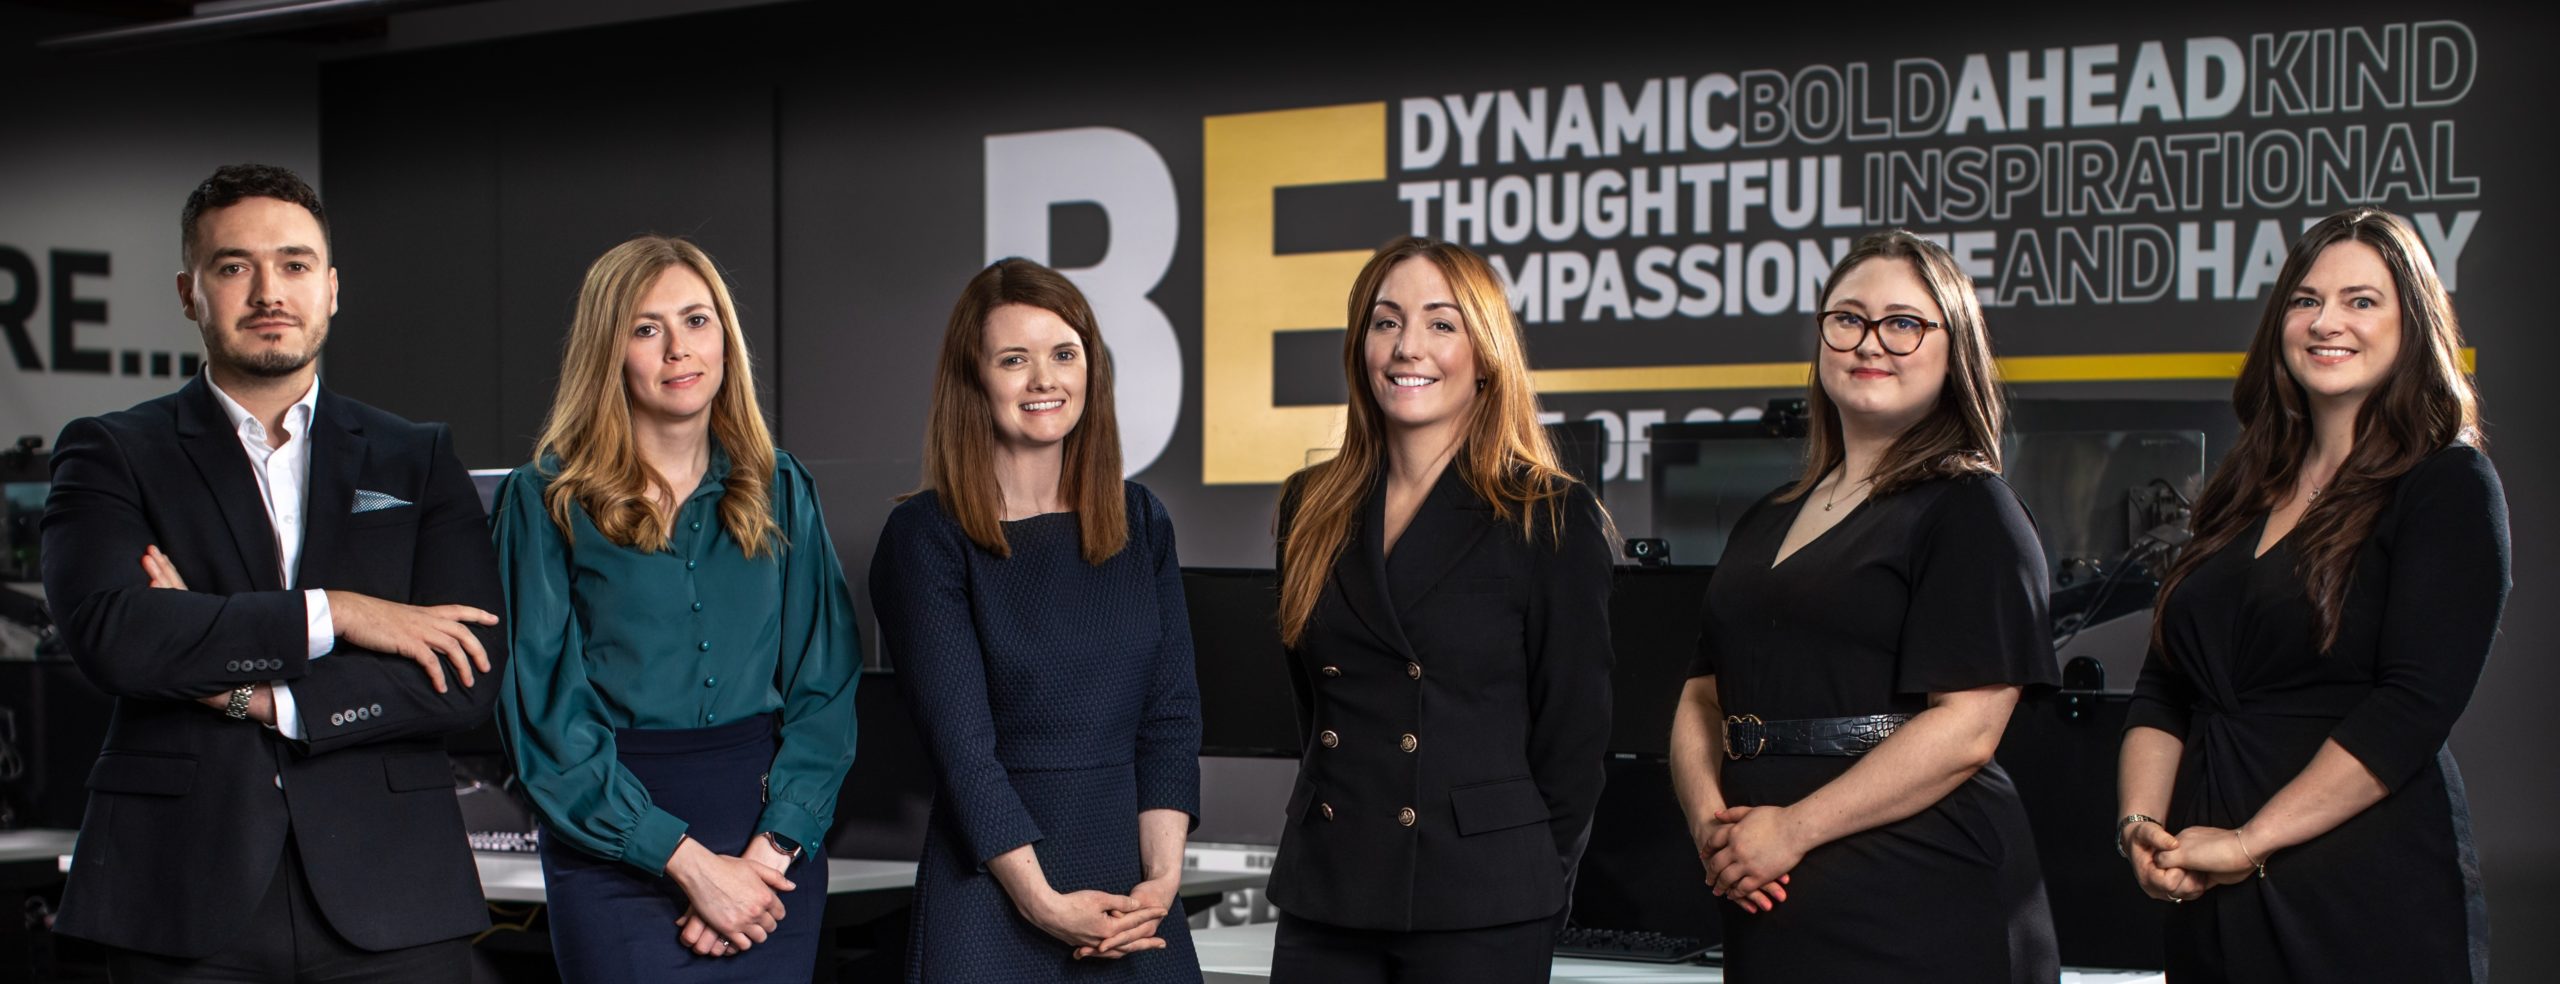 Beyond Law Group announces seven key promotions as it continues to support its talent at all levels